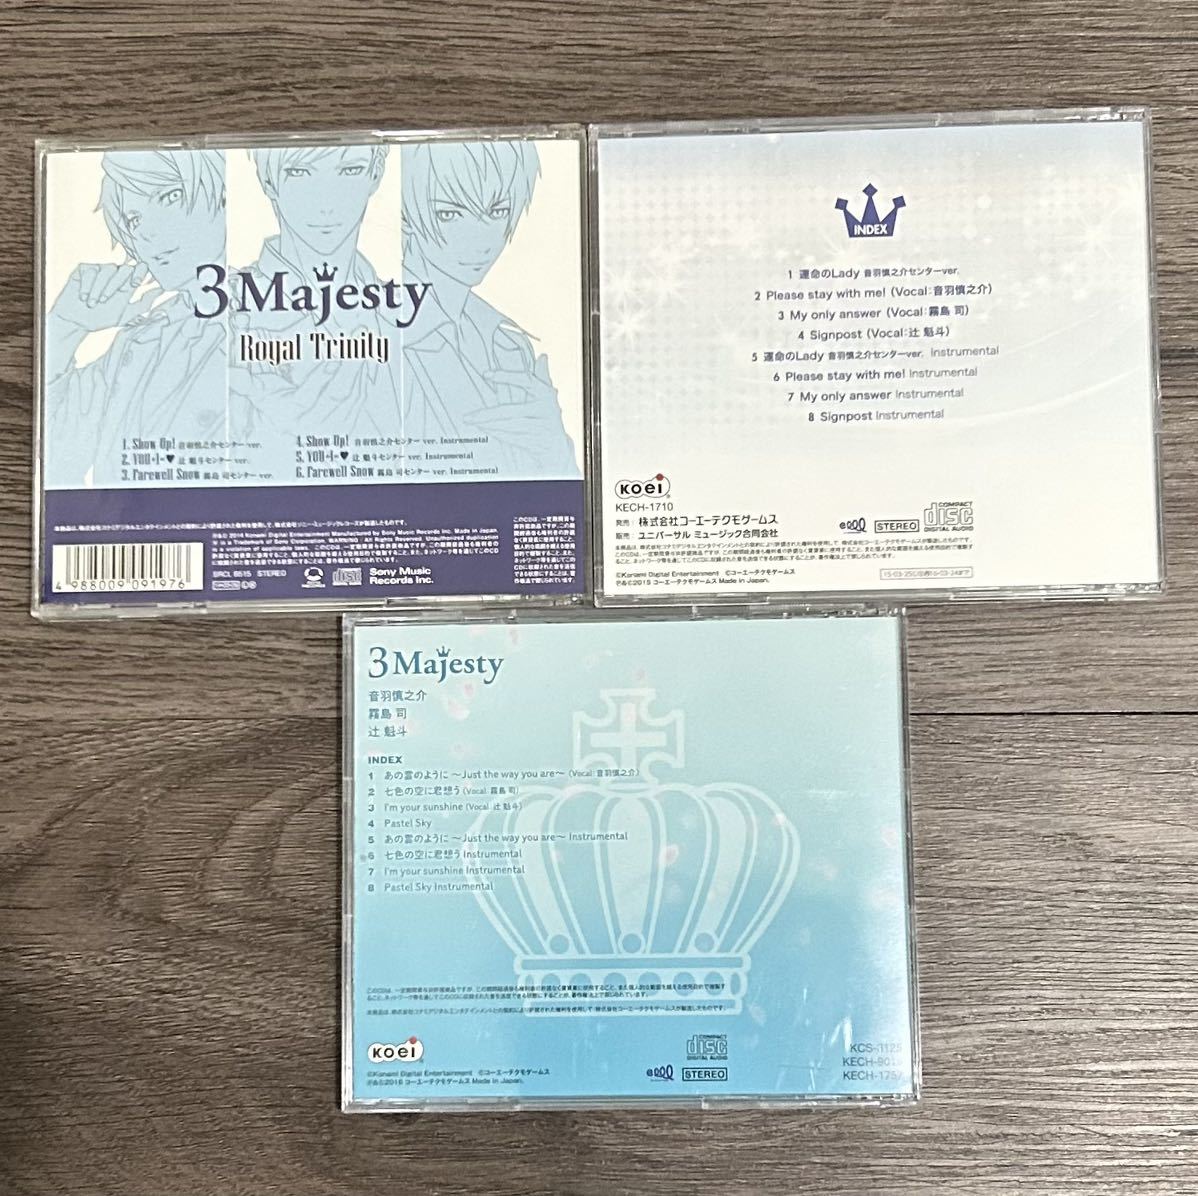 CD5枚　ときめきレストラン ☆☆☆　３Majesty　Royal Trinity　Brand-new　IN THE NOON　X.I.P.　ALTERNATIVE！　IN THE NIGHT_画像3